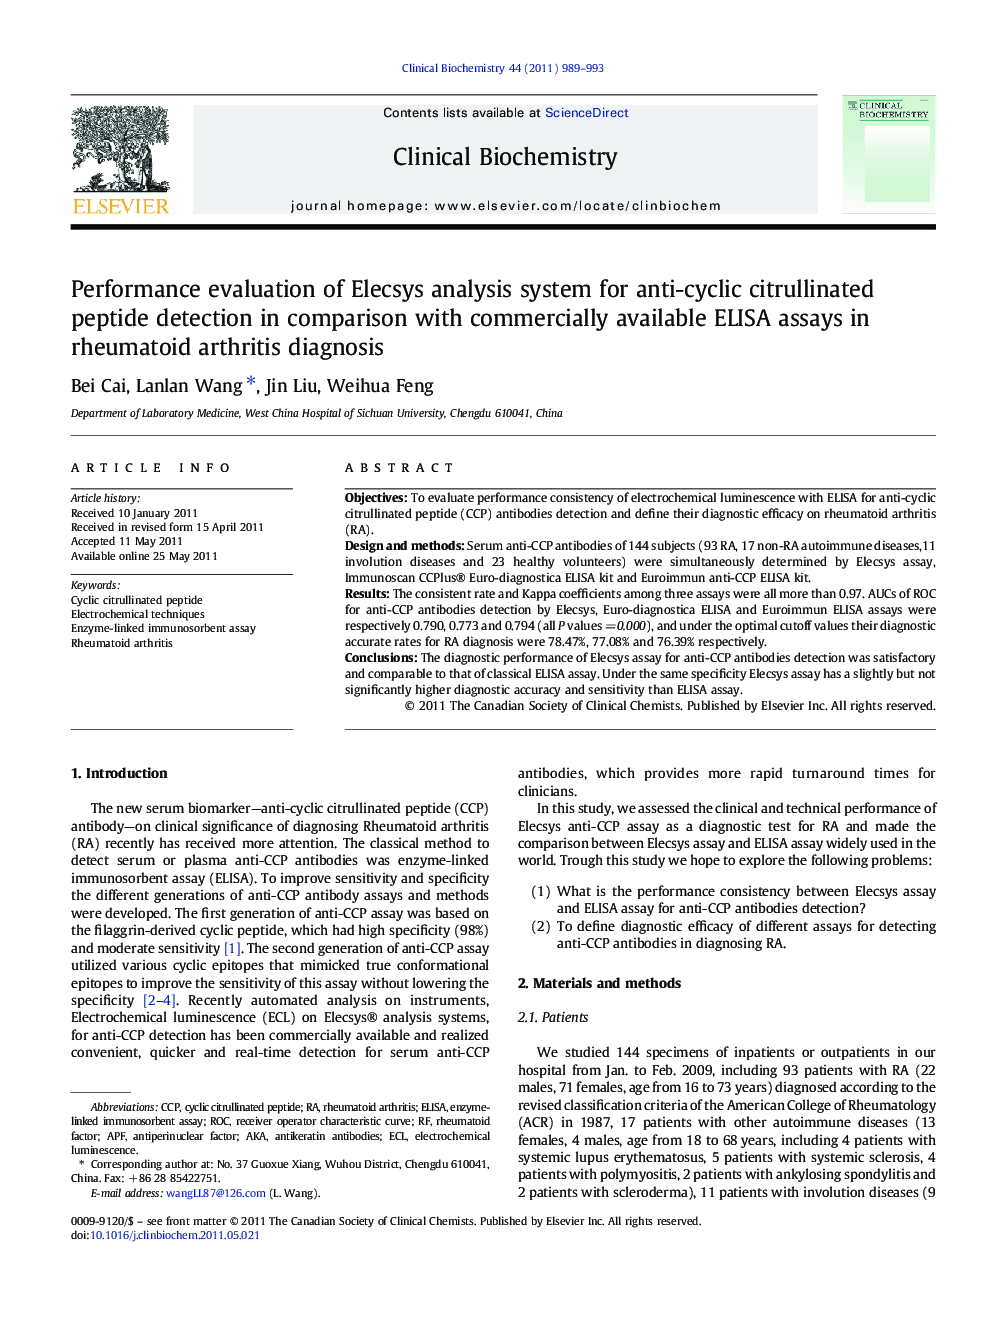 Performance evaluation of Elecsys analysis system for anti-cyclic citrullinated peptide detection in comparison with commercially available ELISA assays in rheumatoid arthritis diagnosis